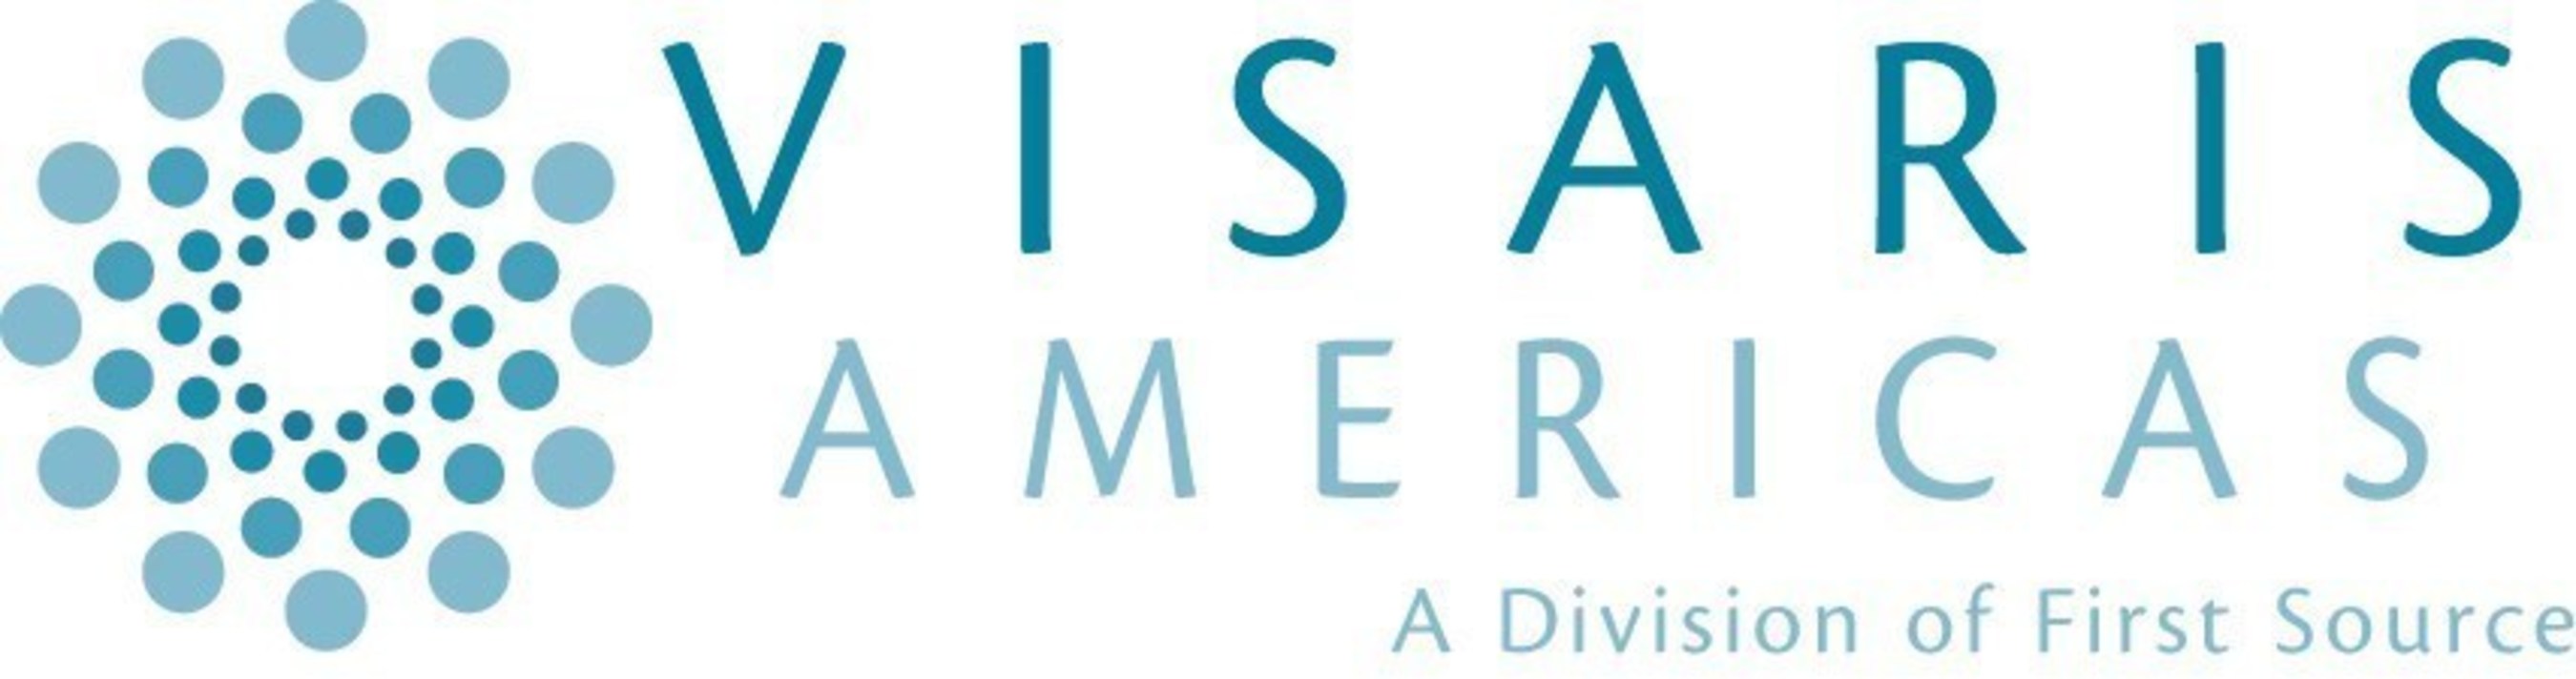 Visaris Americas is a unique entity that brings together a culture of strong service and technical expertise with European-based style, innovative technology and ergonomics to provide a versatile digital radiography product portfolio for the North American and South American markets. www.visarisamericas.com